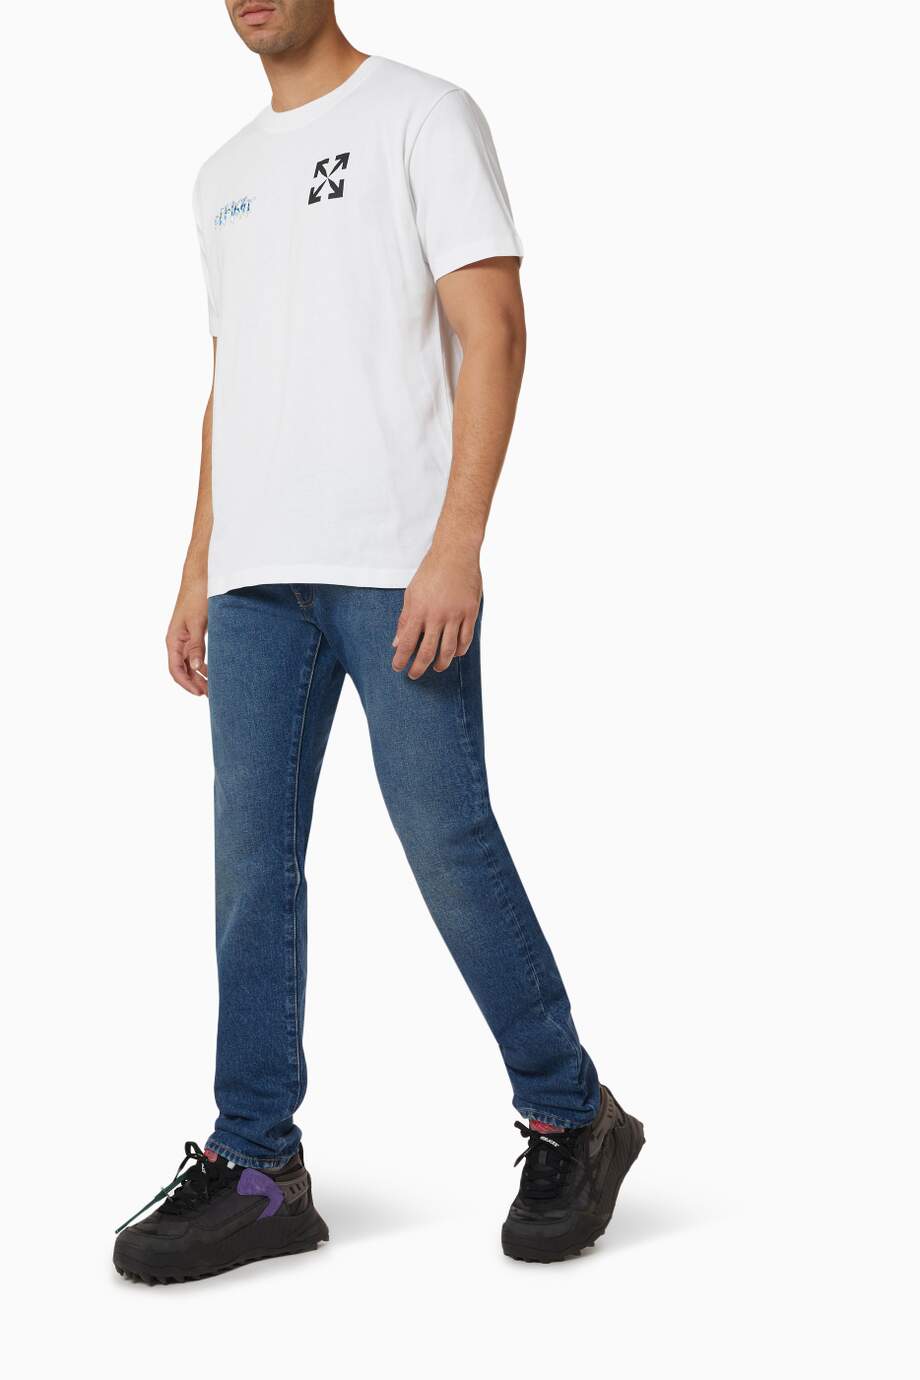 OFF-WHITEOUT   T-shirt in Cotton Jersey